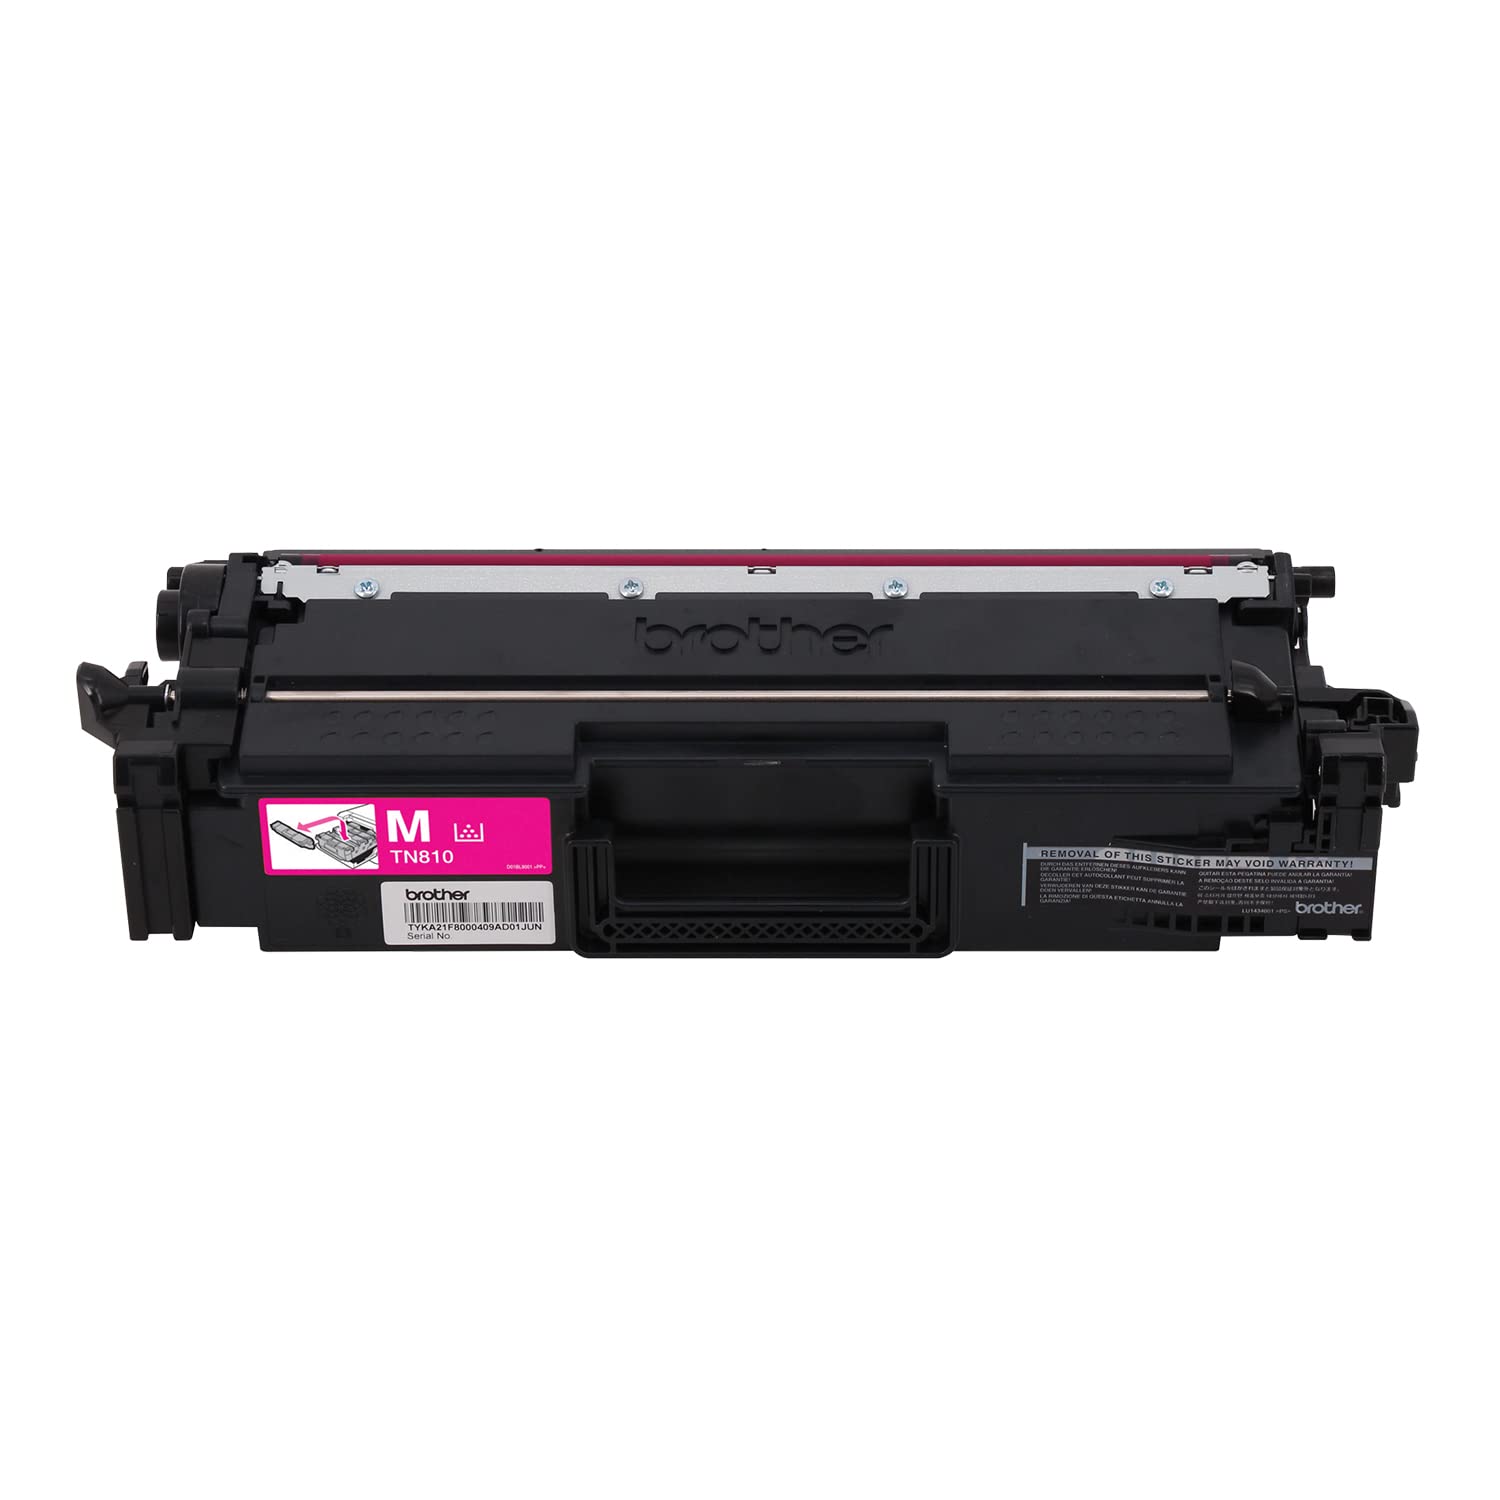 Brother Genuine Standard Yield Toner Cartridge, TN810M, Replacement Magenta Toner, Page Yield Up to 6,500 Pages